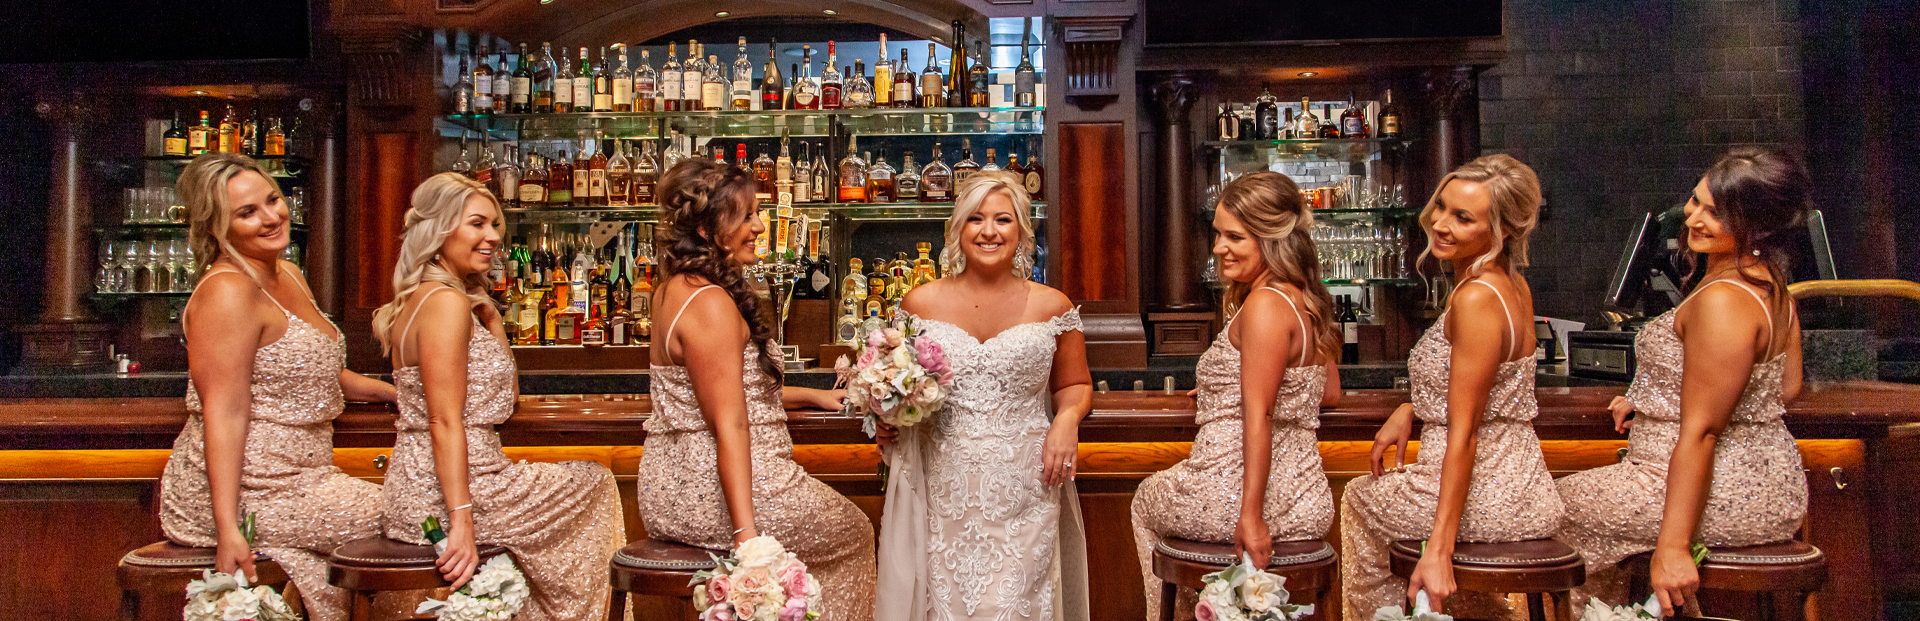 Bridesmaids taking a picture at the bar